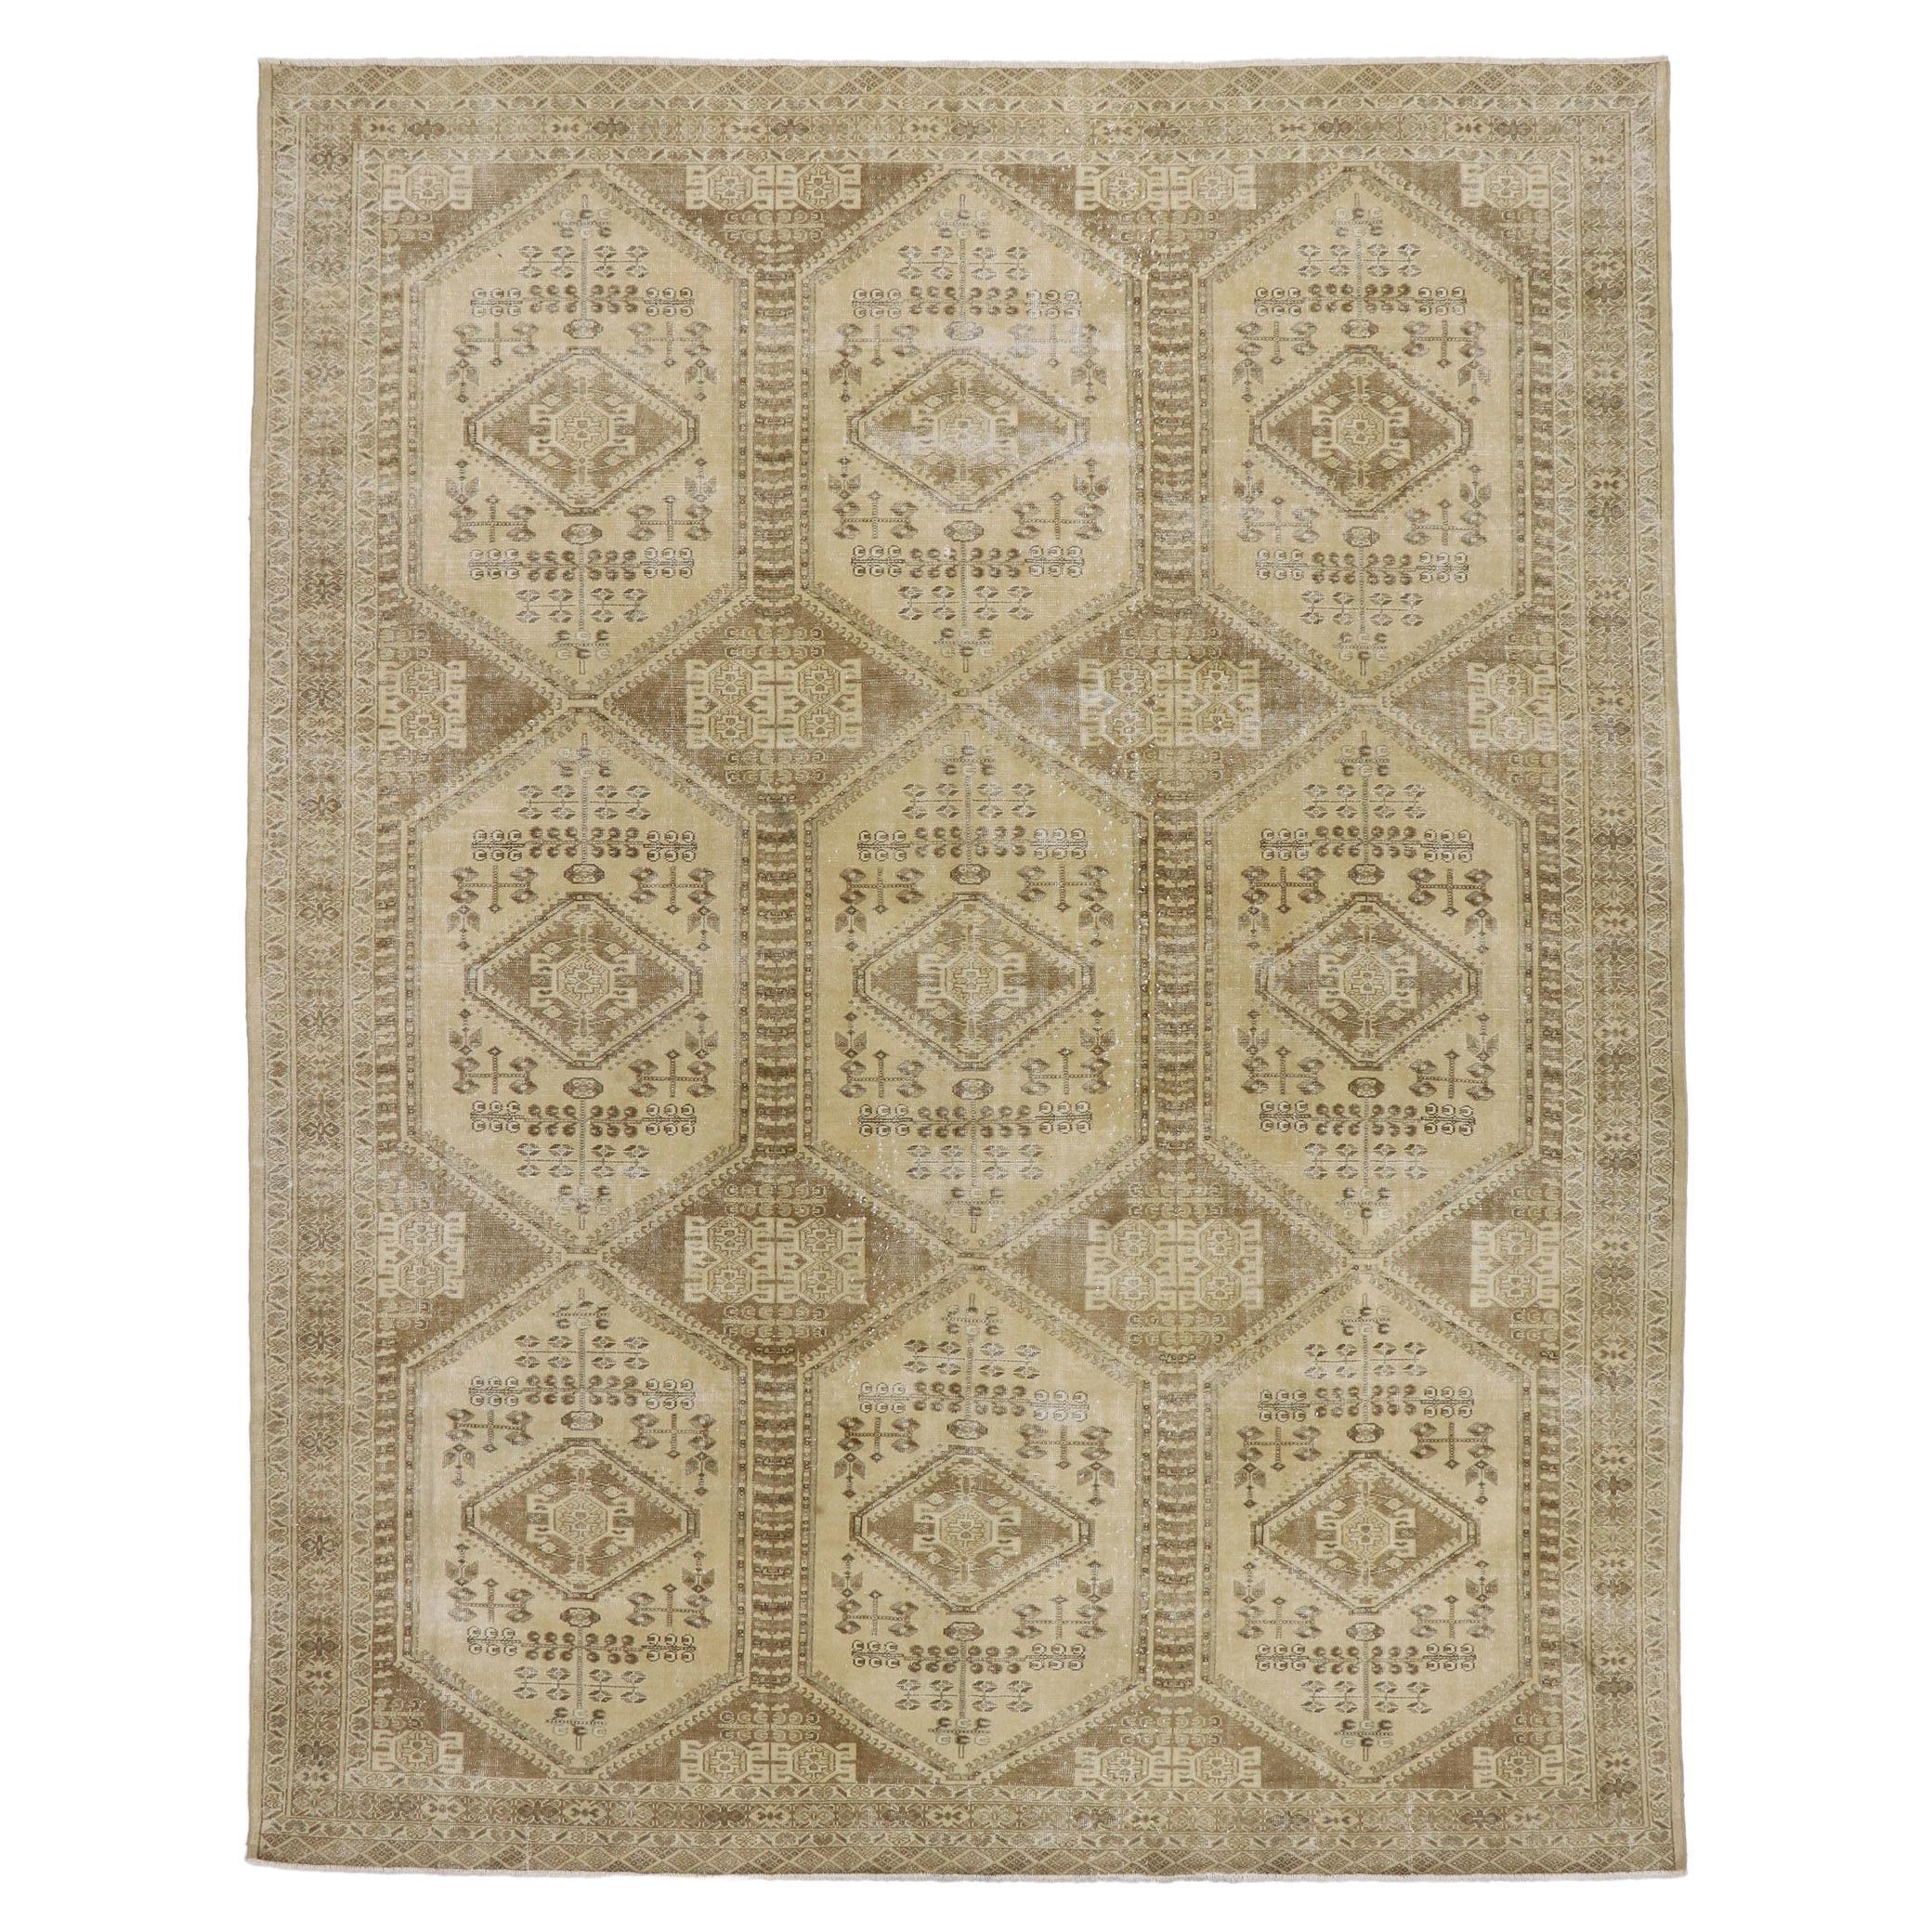 Distressed Antique Persian Turkaman Rug with Modern Rustic Style